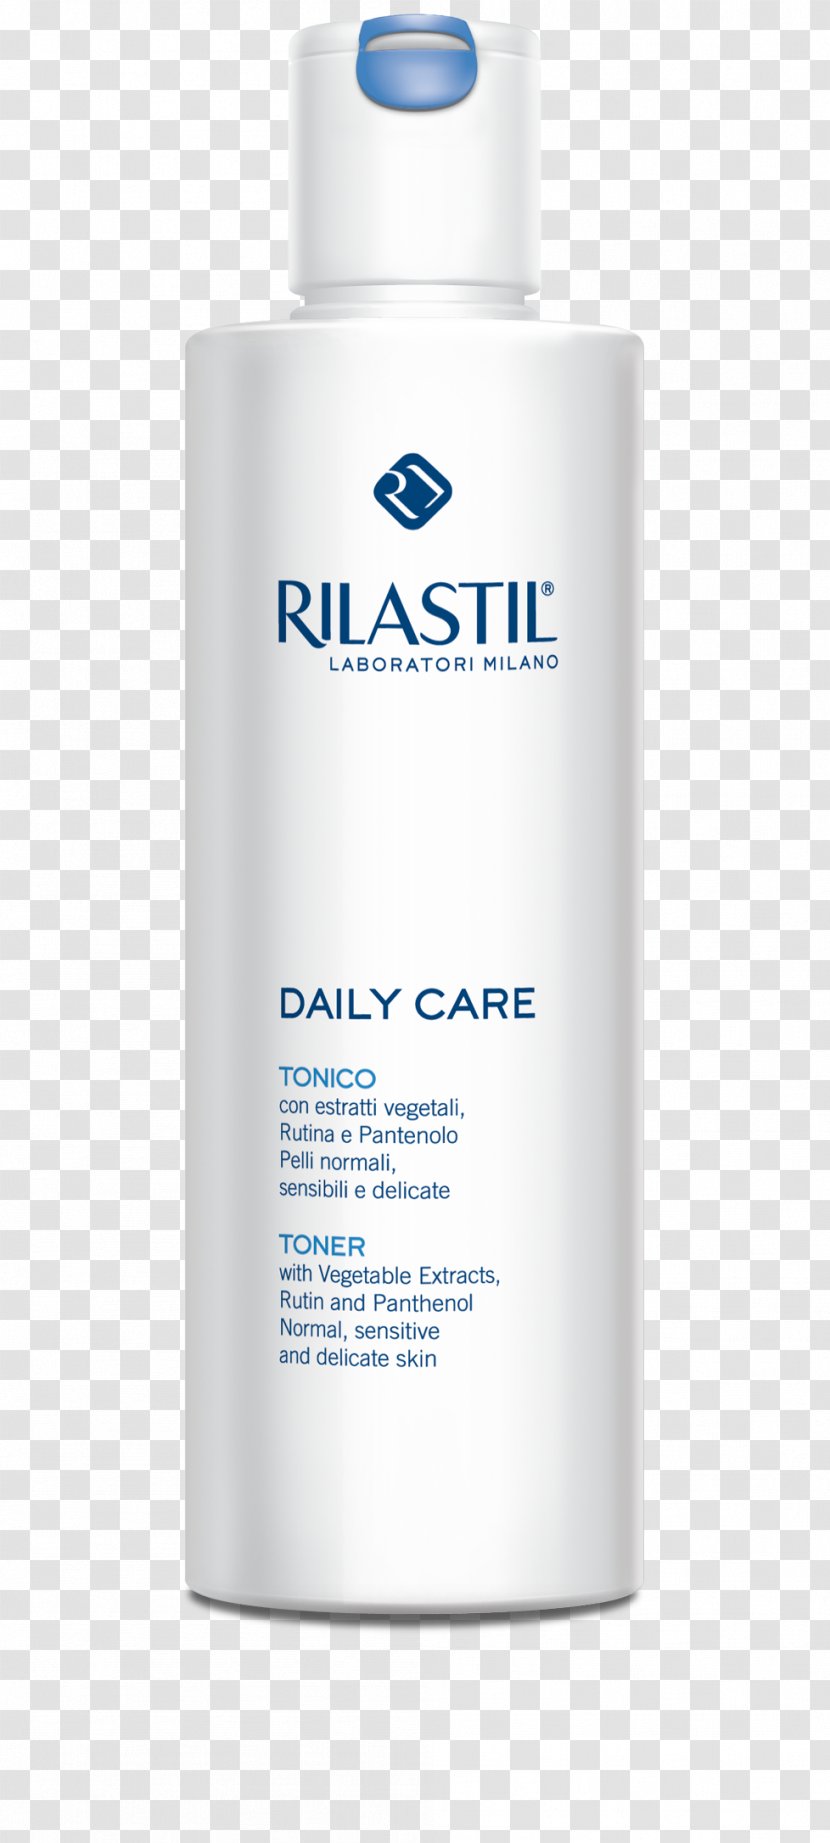 Lotion Rilastil Daily Care Facial Toner (with Vegetable Extracts Rutin And Panthenol) 250 Ml Reinigungswasser Milliliter - Liquid - Horsetail Herb Powder Transparent PNG